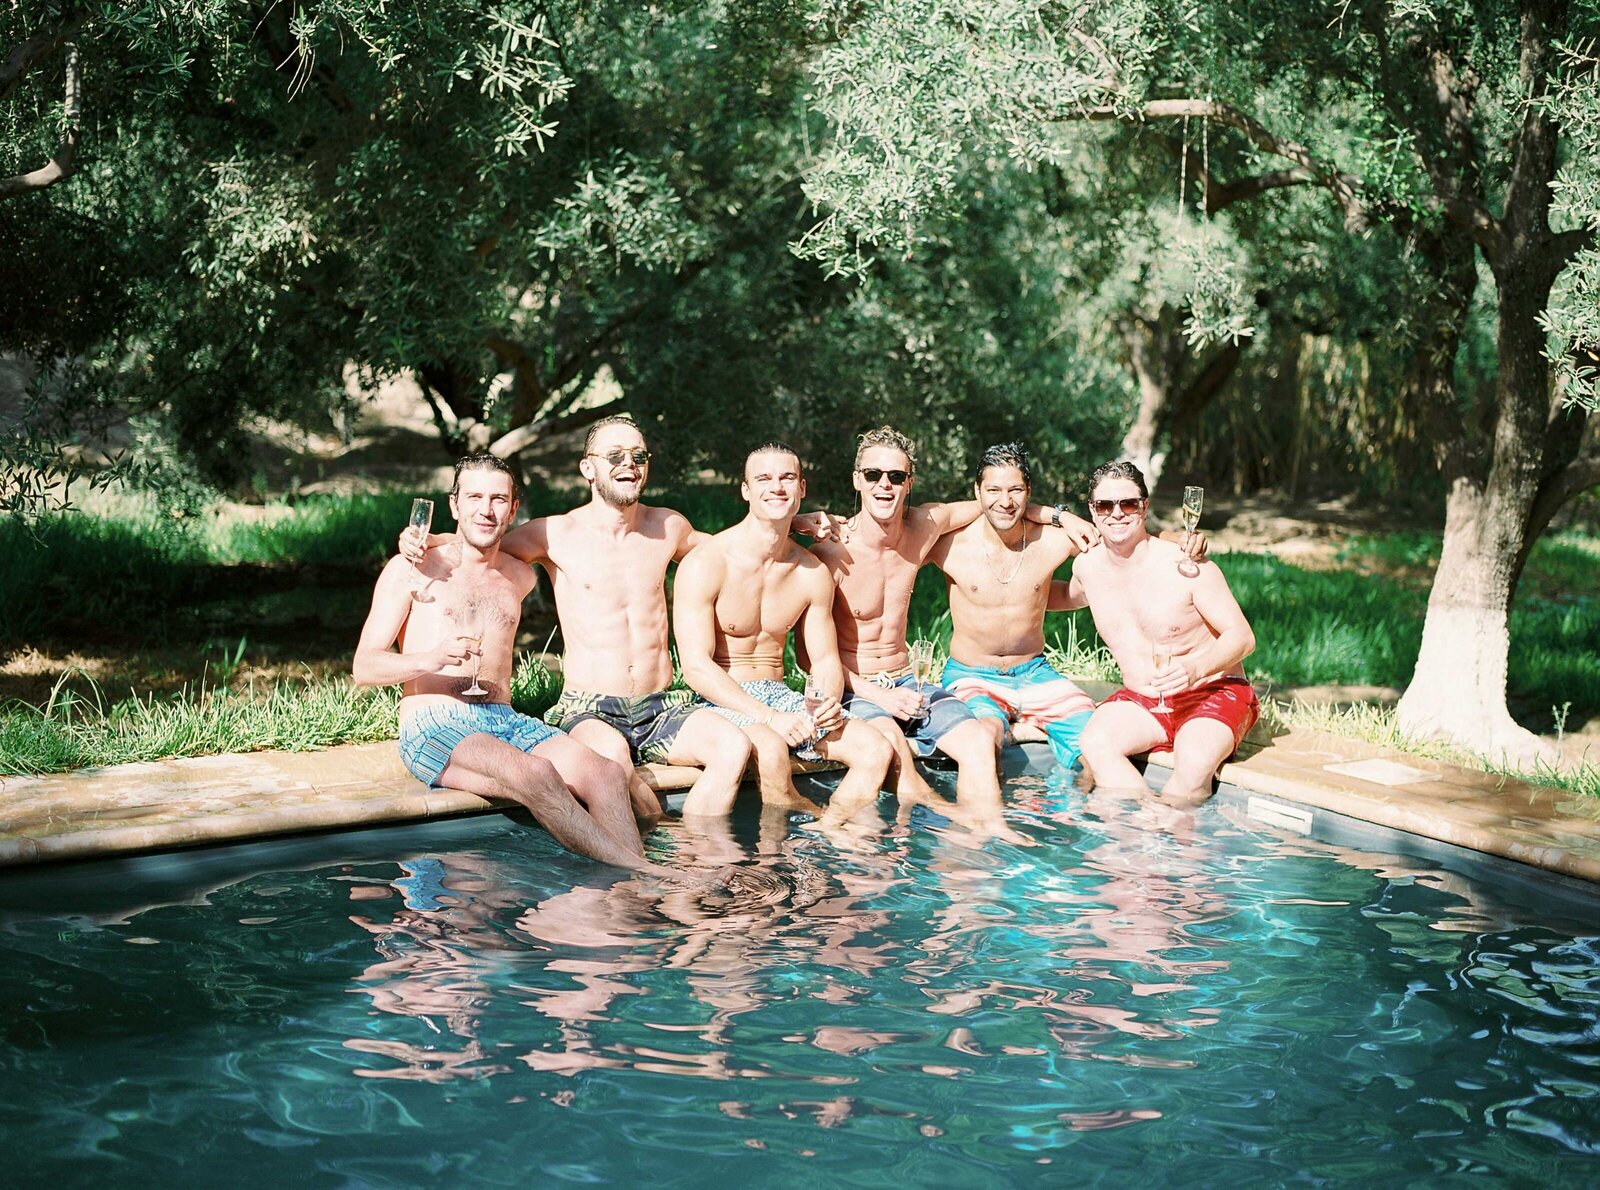 Groom and groomsmen hanging out at the pool during a wedding in Morocco